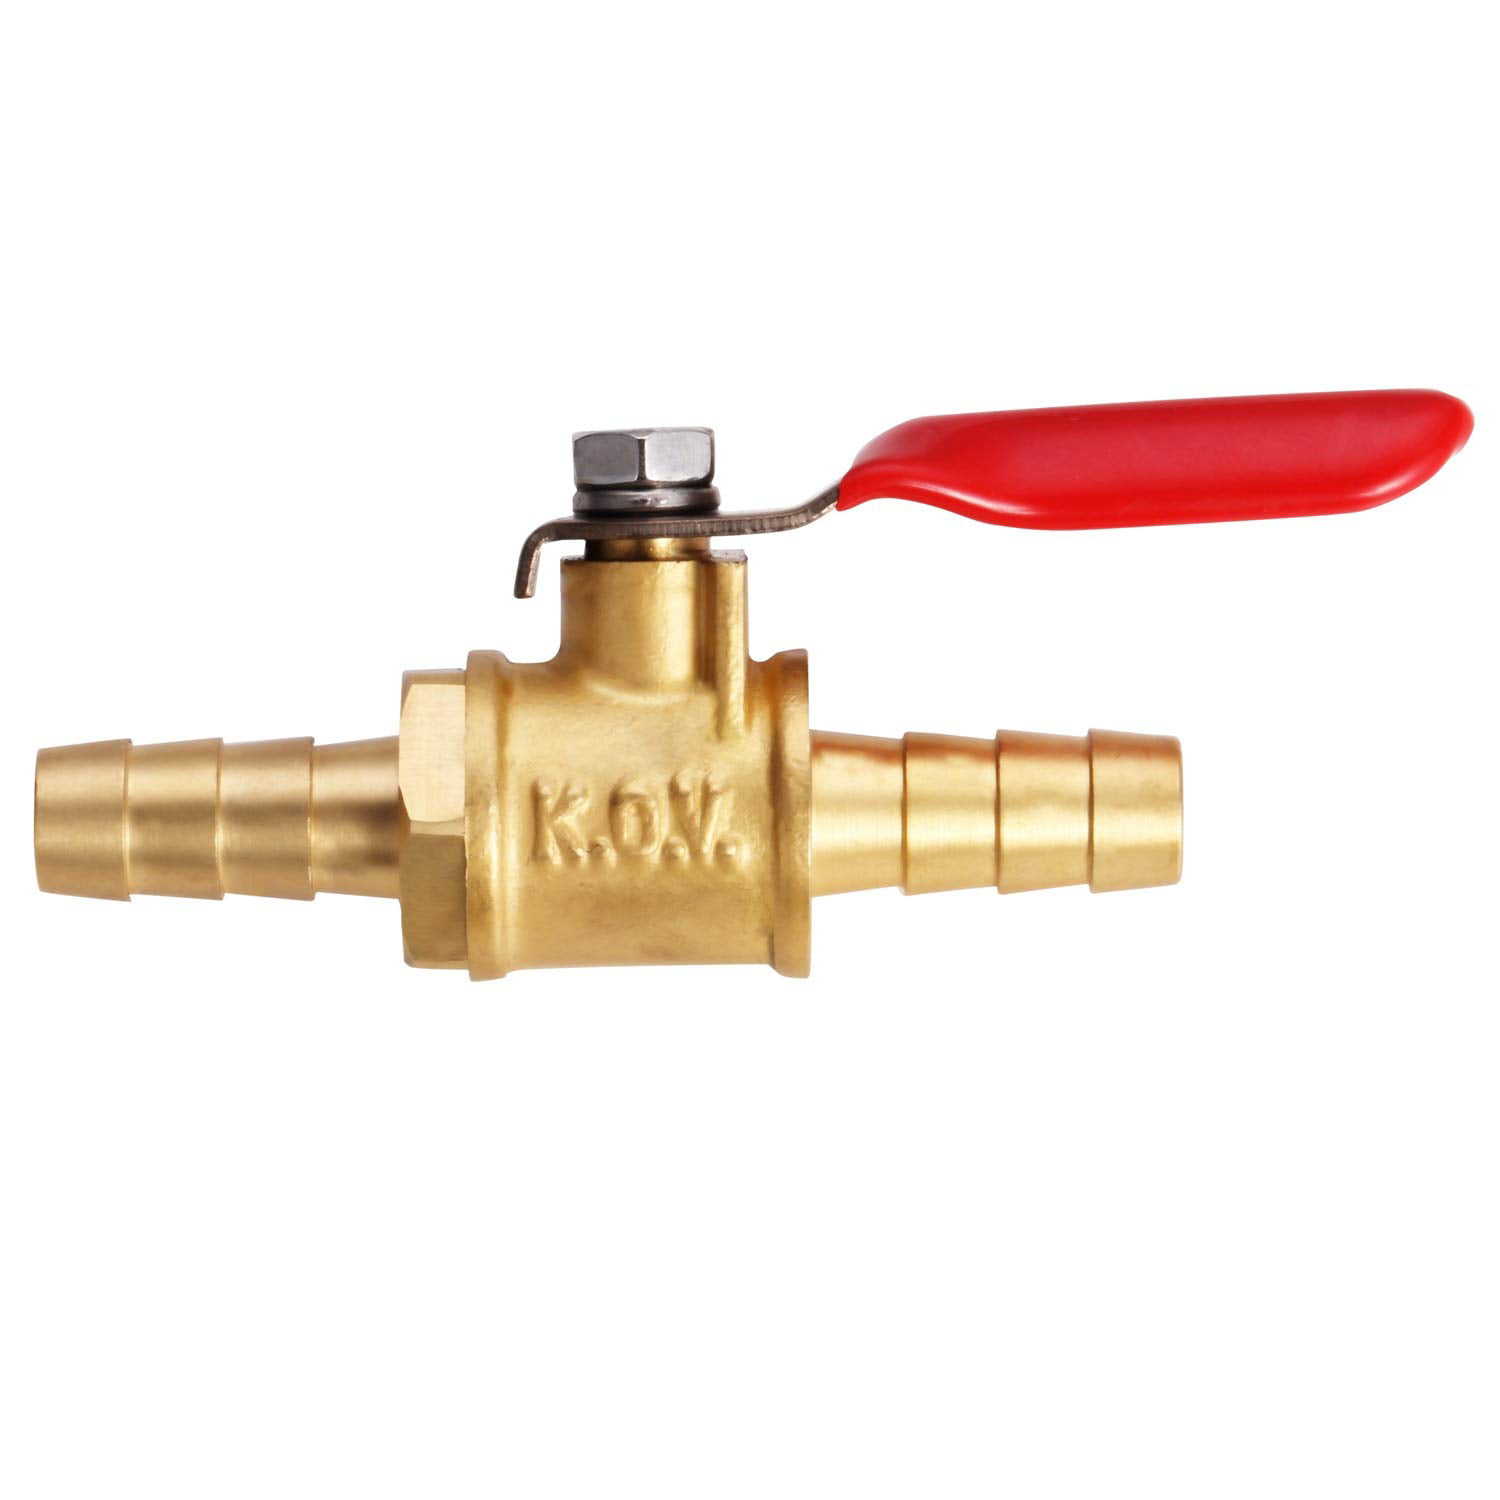 Brass Ball Valve 1/4"Shut off Female to Male Faucet Switch Gas Fluid Pipe 